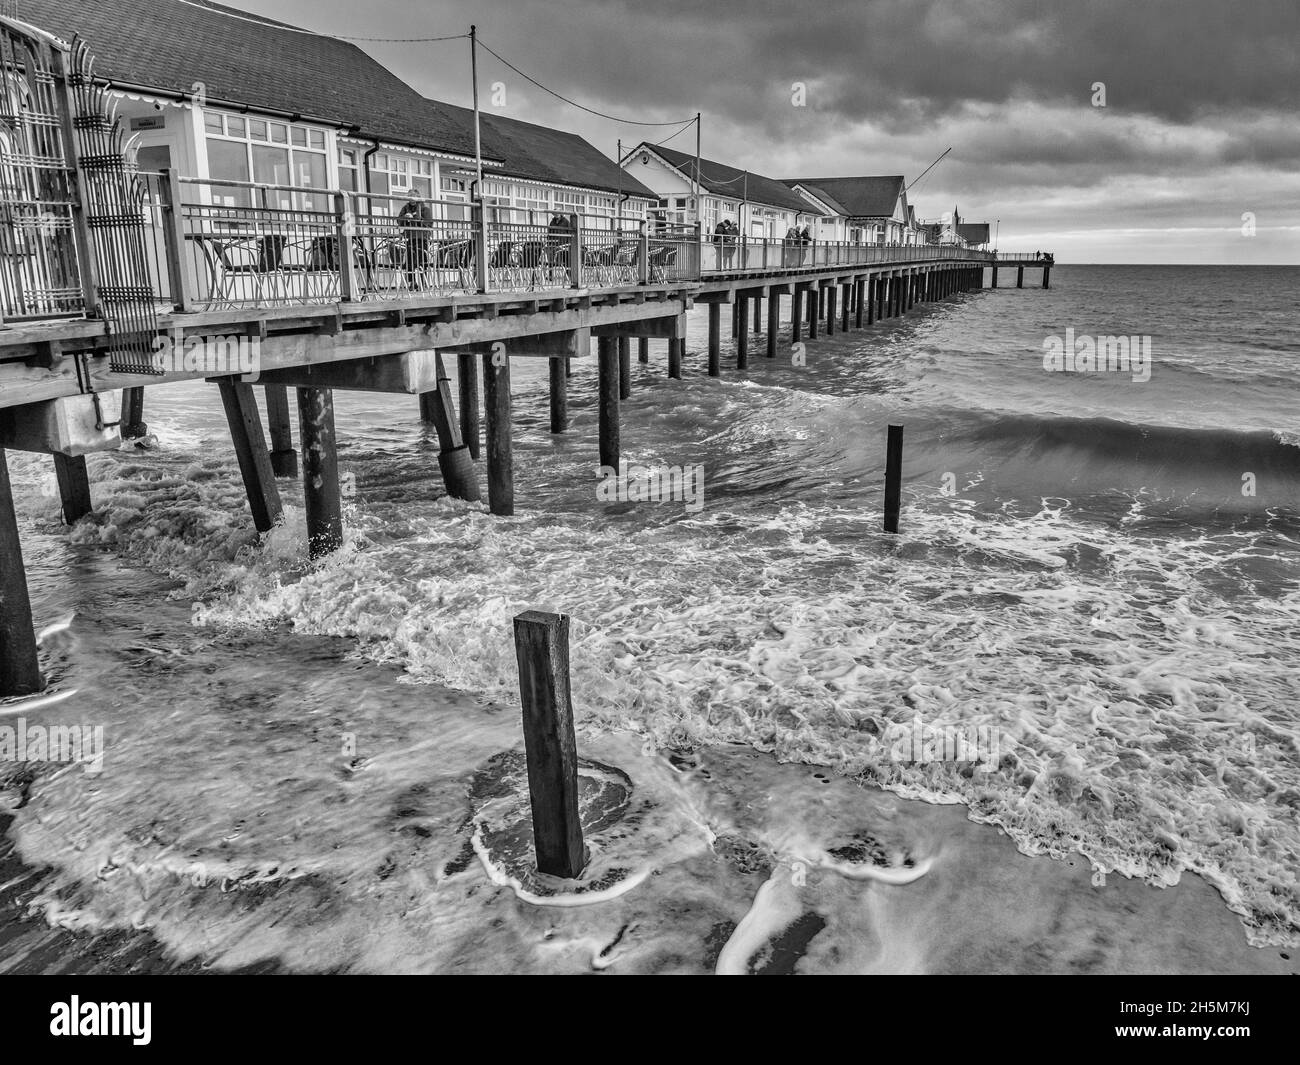 This is Southwold Pier at the coastal resort town of Southwold in the county of Suffolk of East Anglia in Southwest England Stock Photo